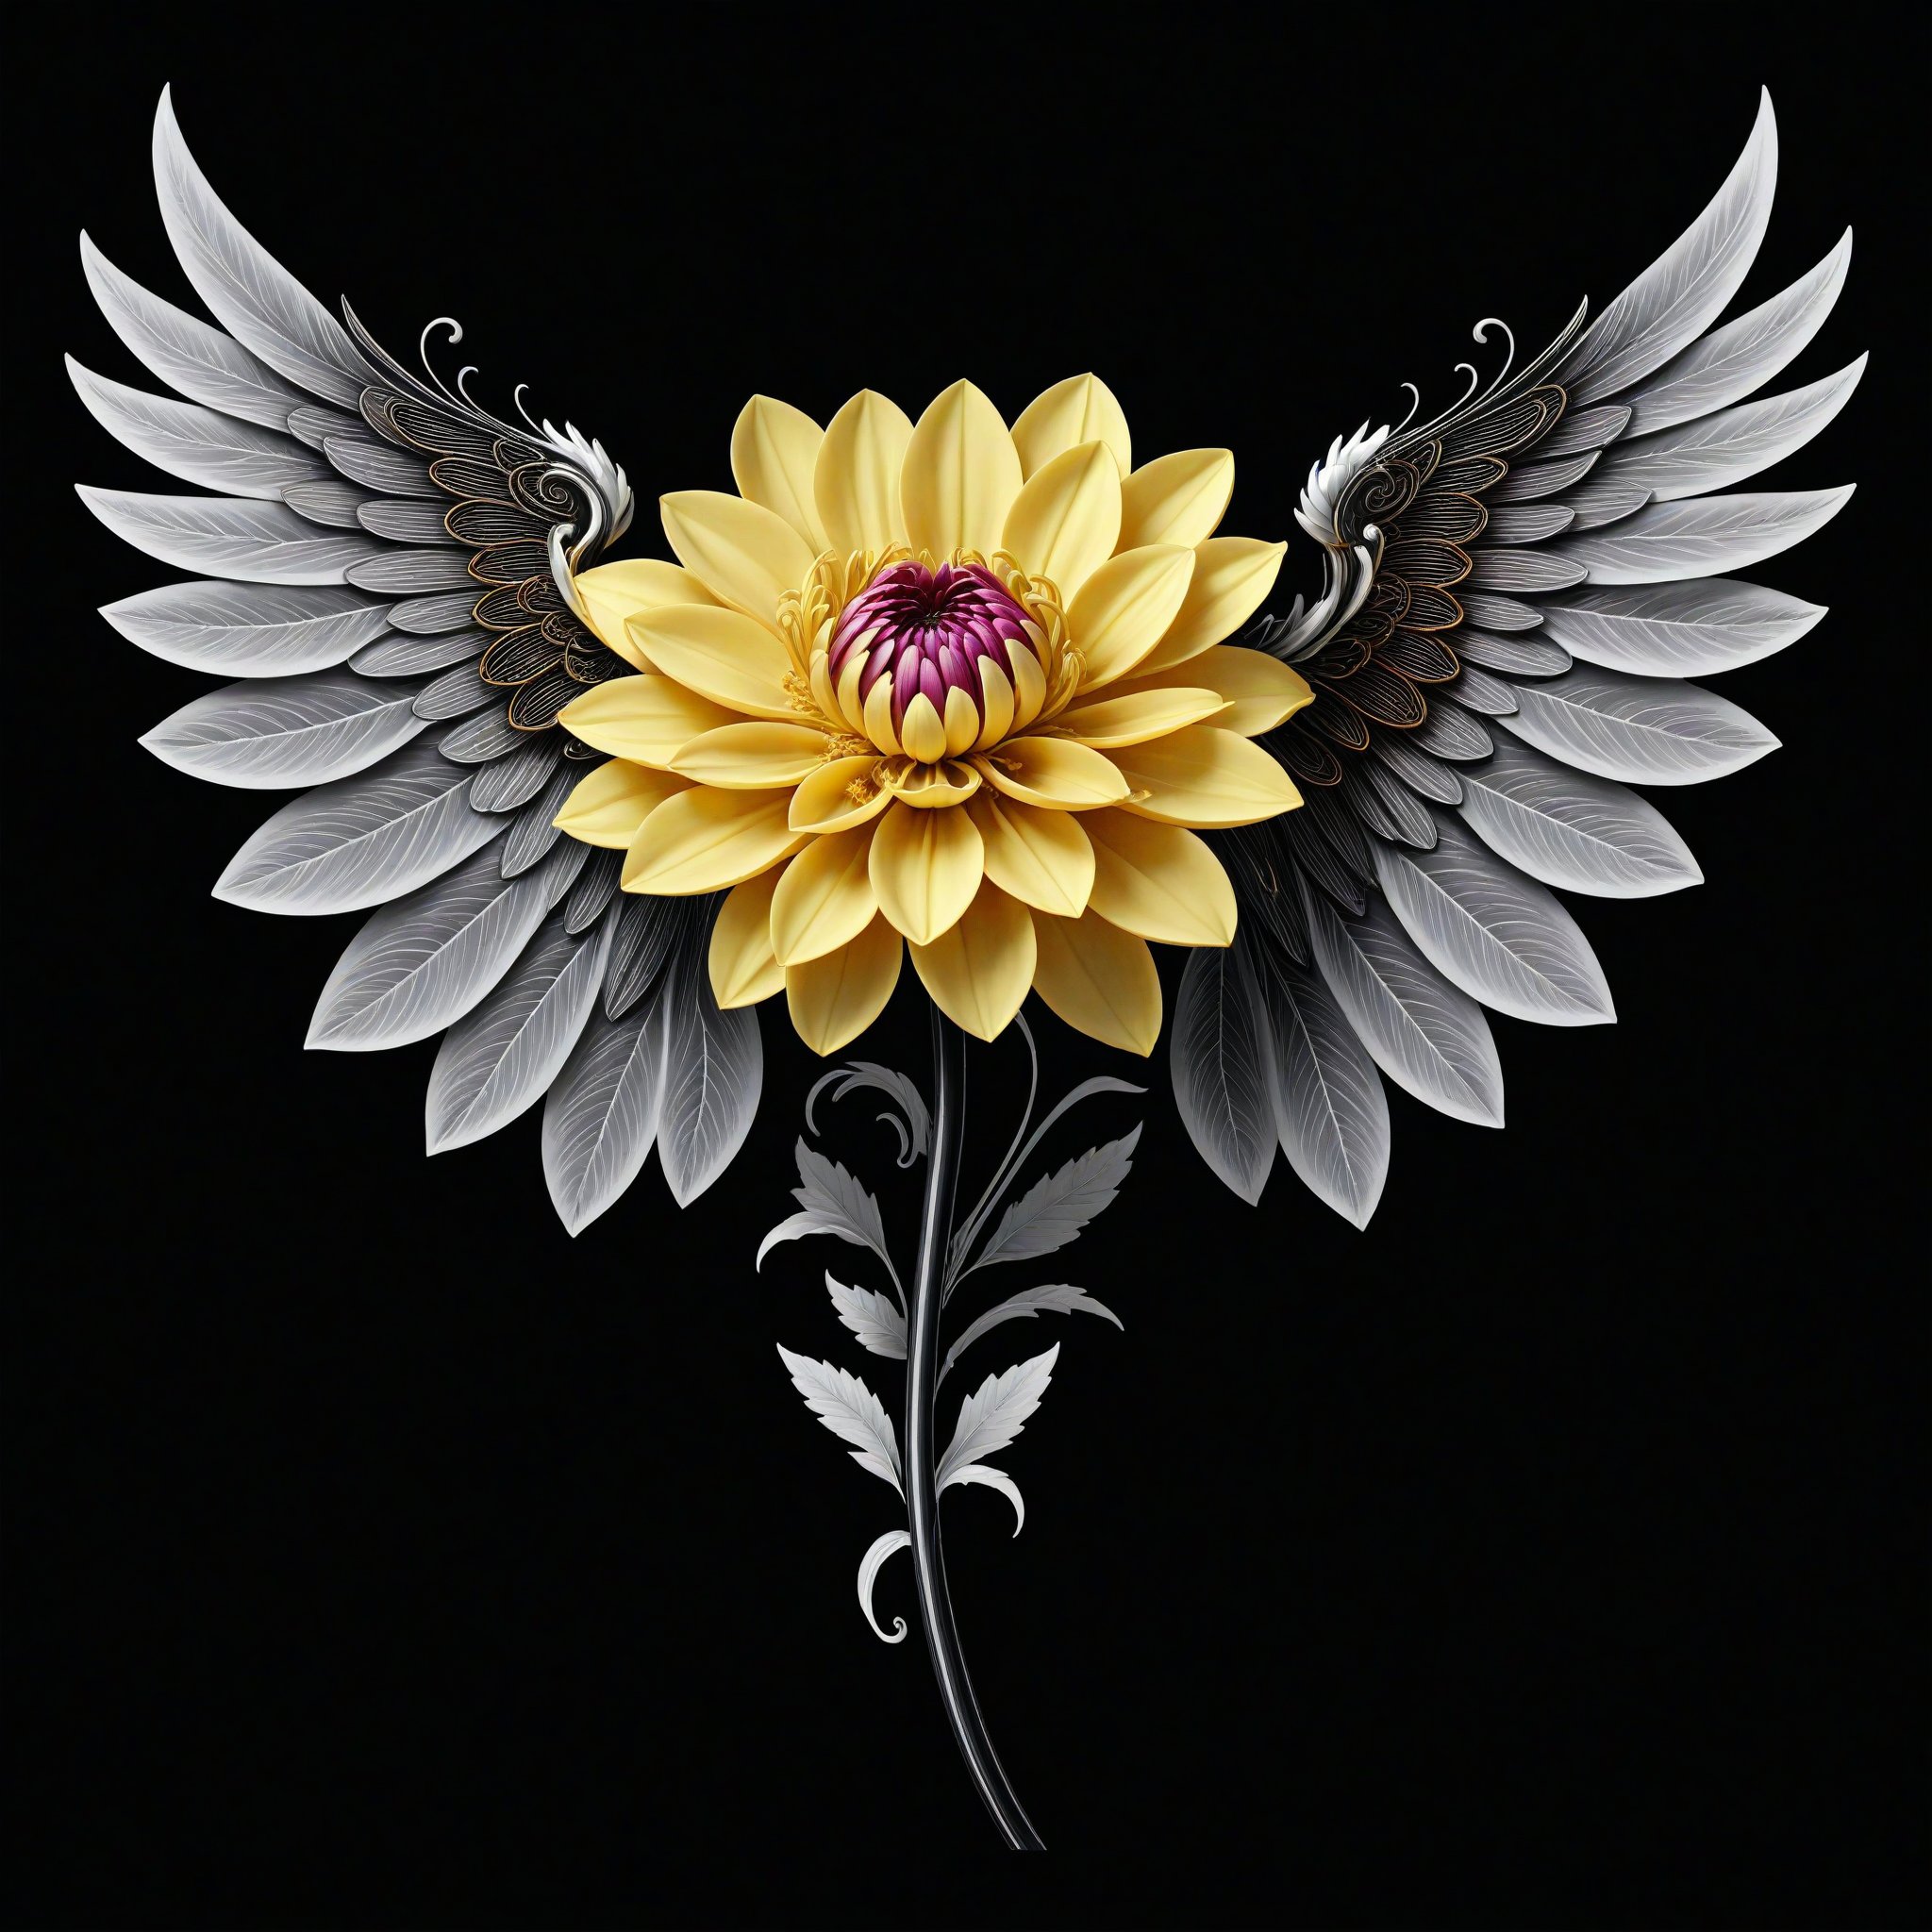 a dhalia  flower whit wing majestic with clasic ornament Mechanical lines Elegance T-shirt design, BLACK BACKGROUND